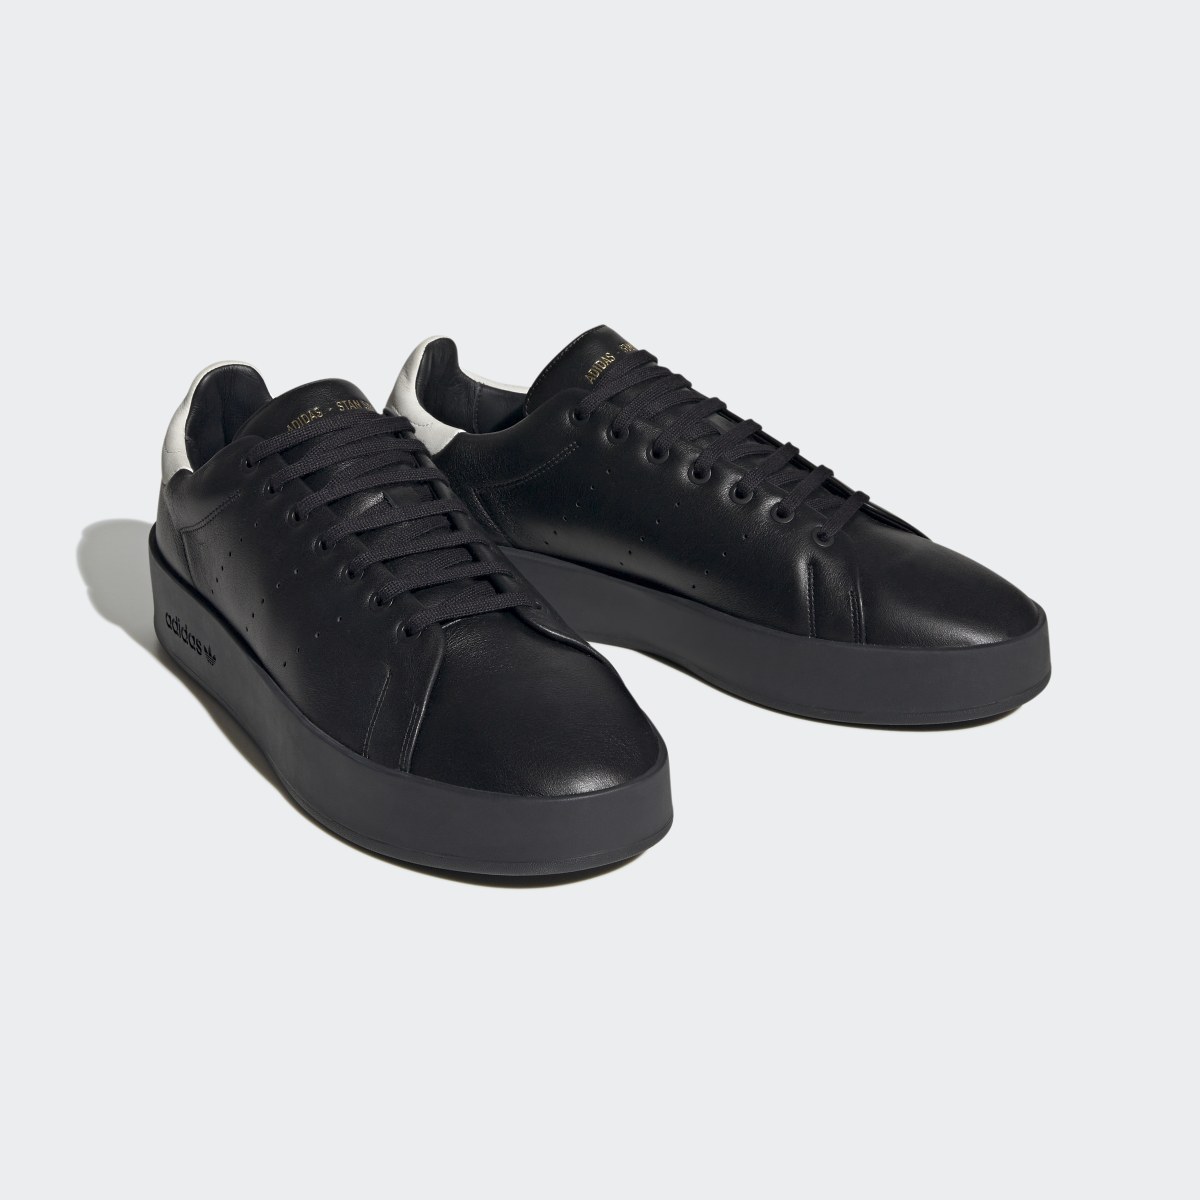 Adidas Chaussure Stan Smith Recon. 5